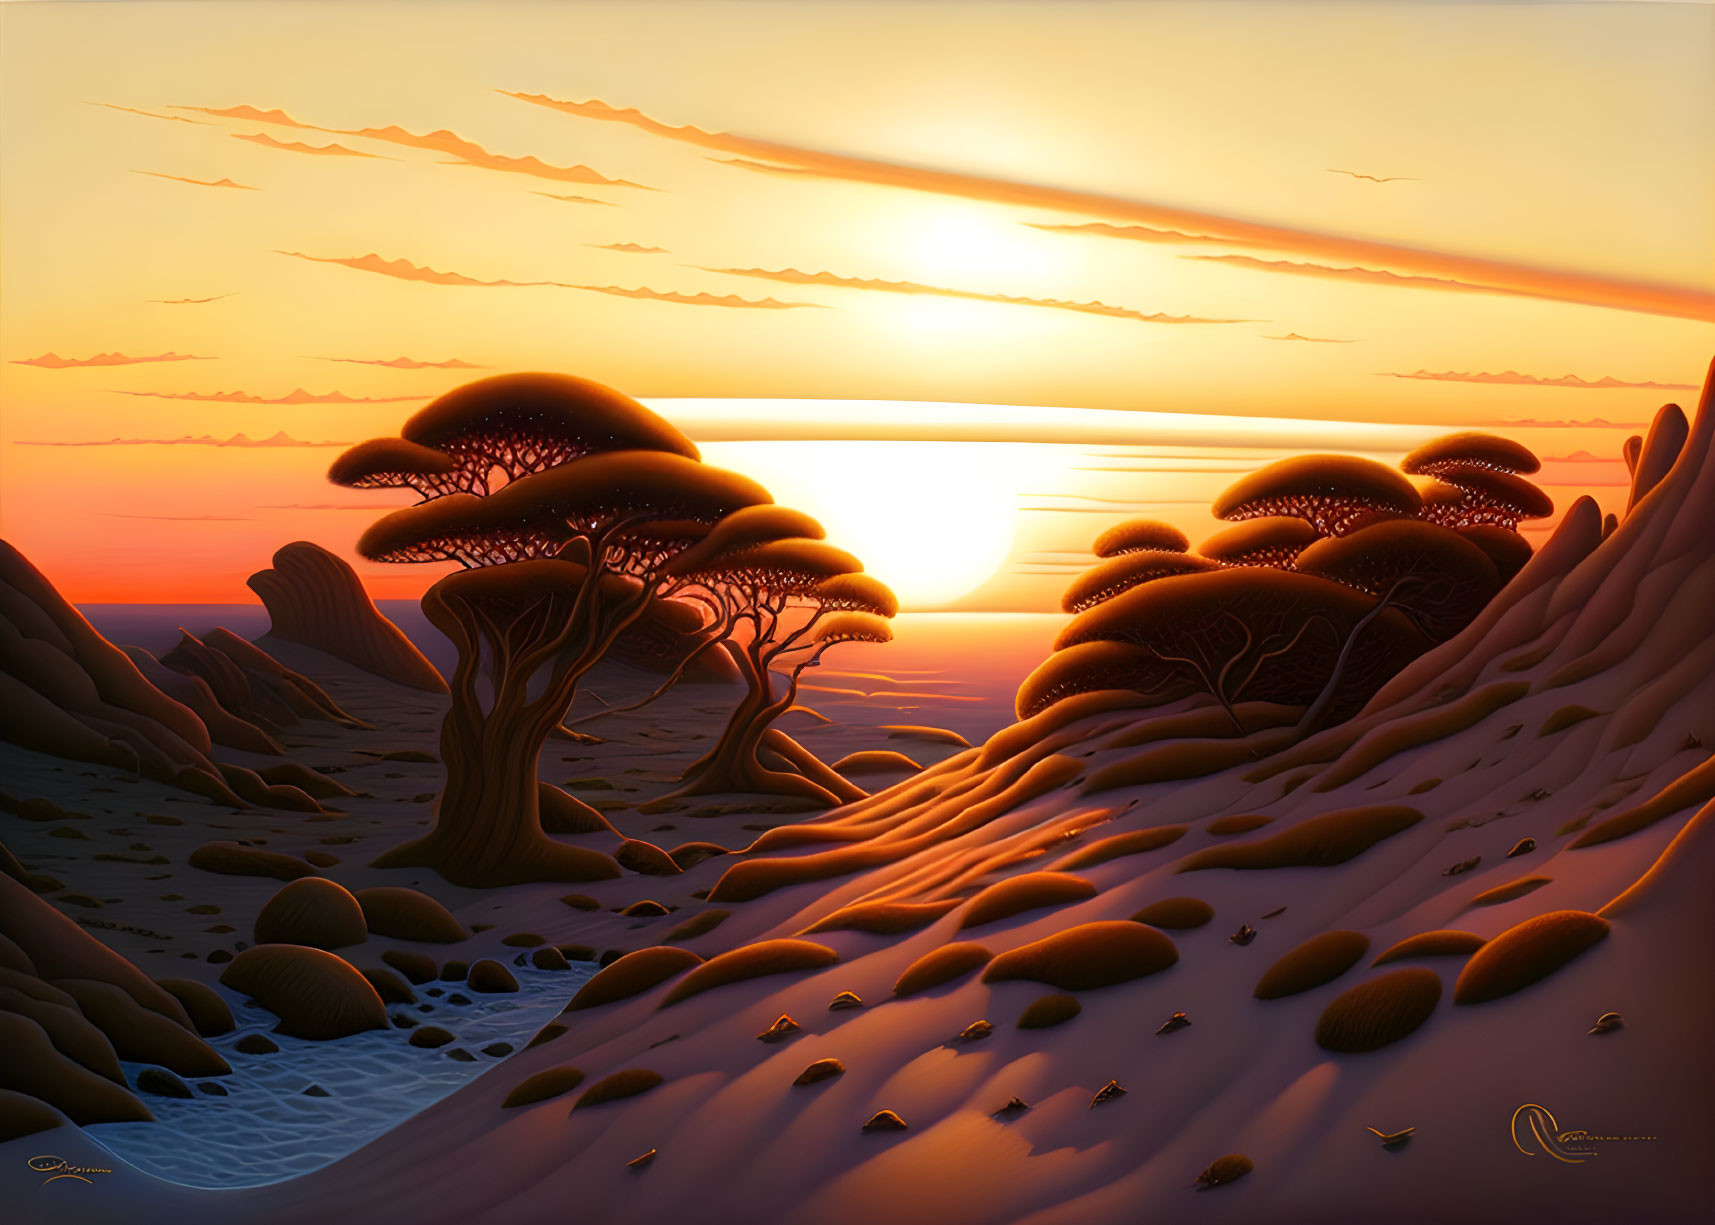 Surreal sunset landscape with stylized trees and warm sky